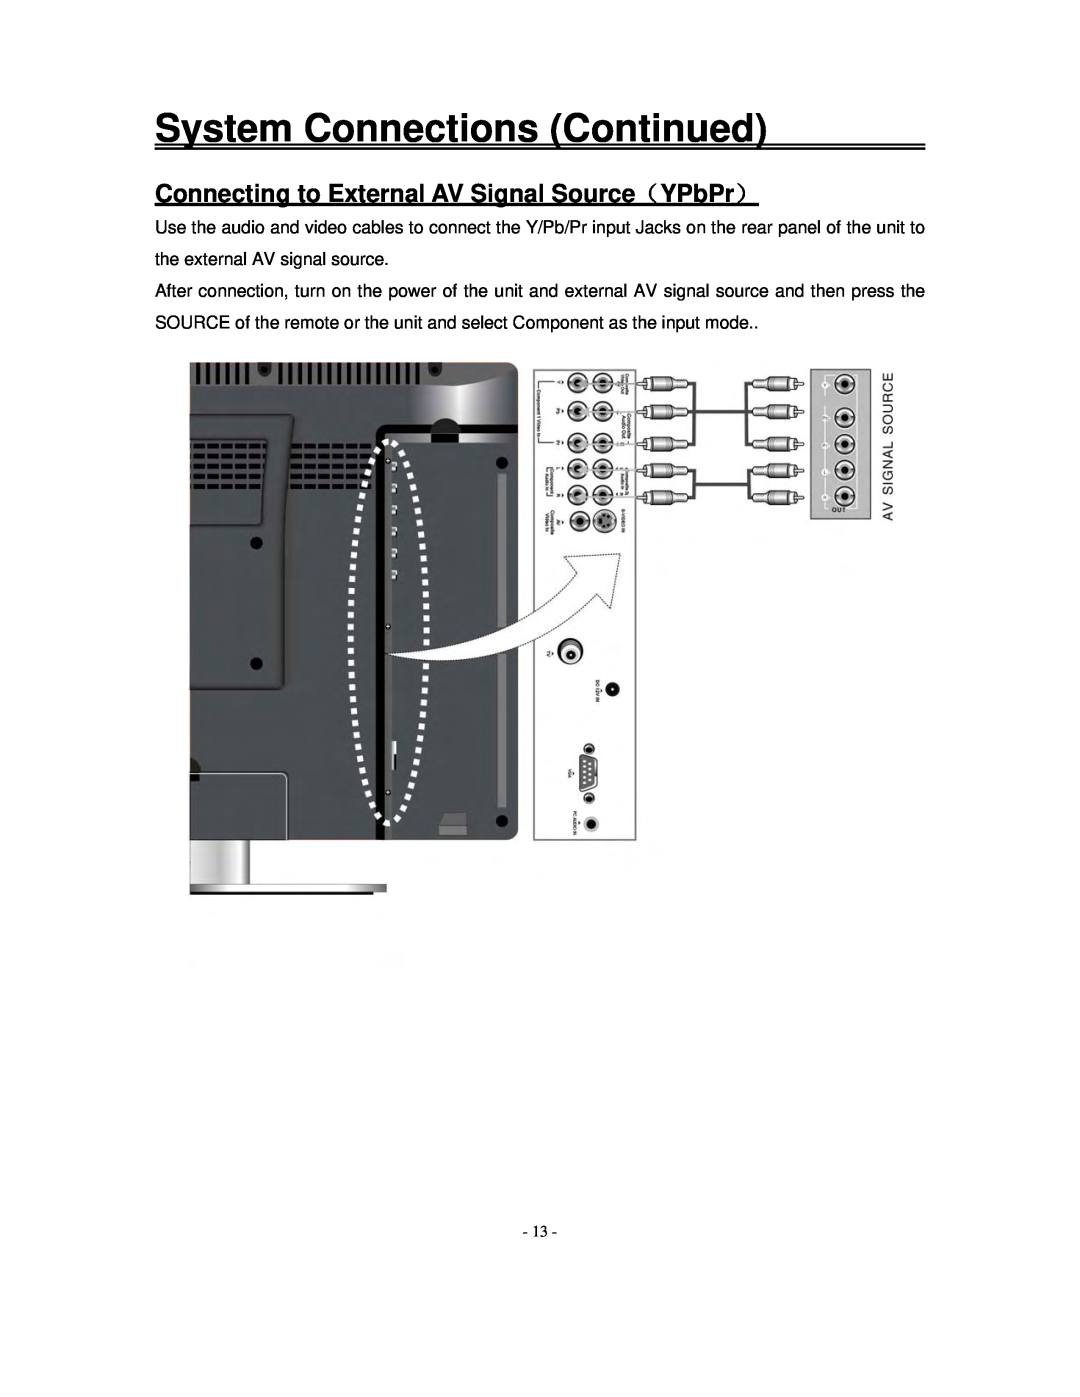 Polaroid FXM-1911C manual System Connections Continued, Connecting to External AV Signal Source（YPbPr） 